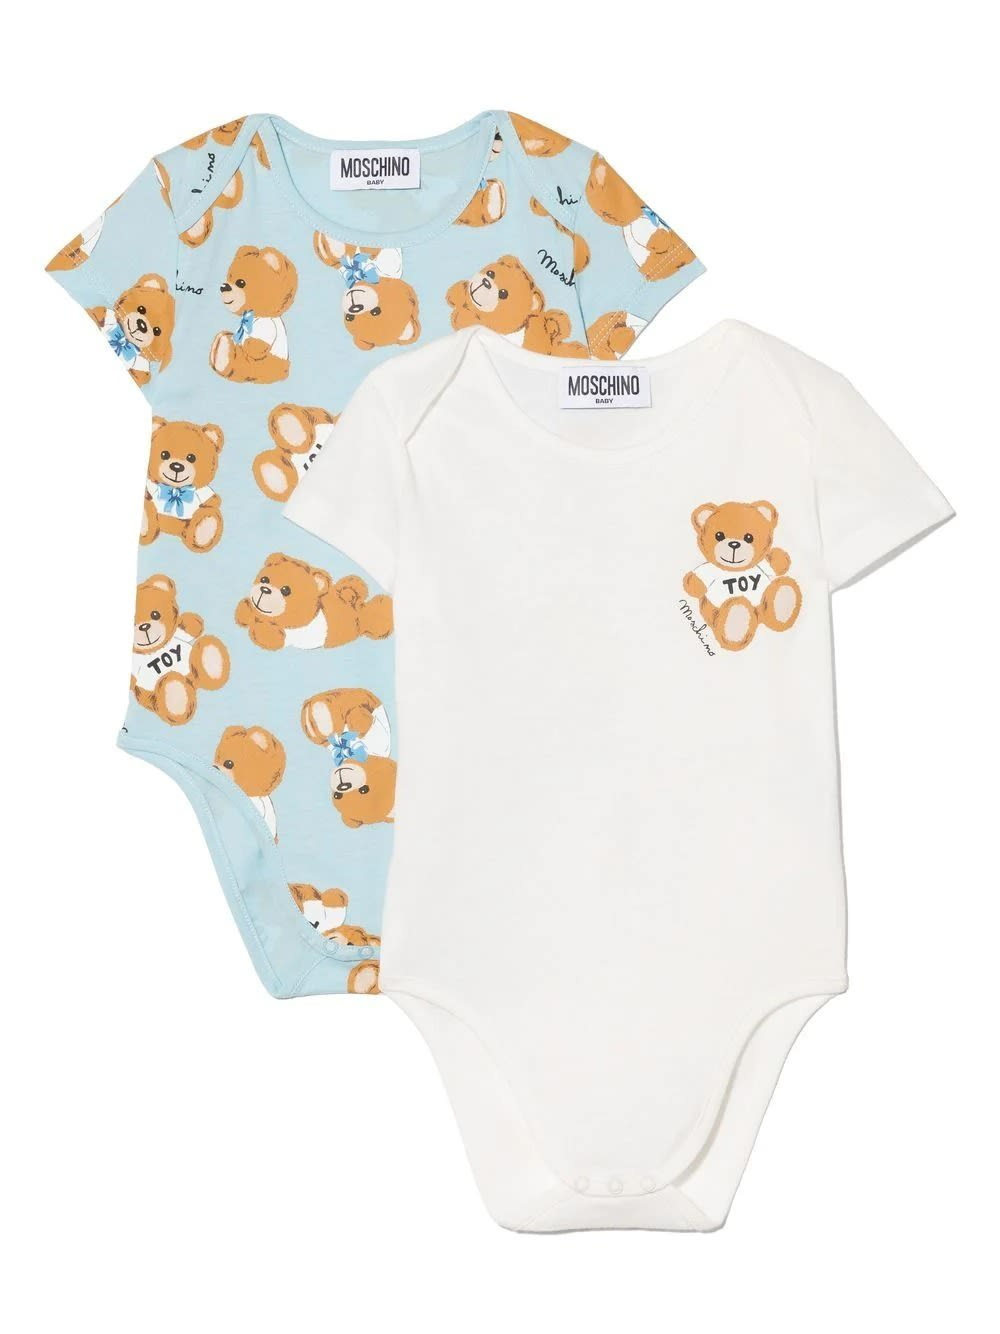 Moschino Set 2 Baby Bodysuits In White And Light Blue Cotton With Teddy Bear Print